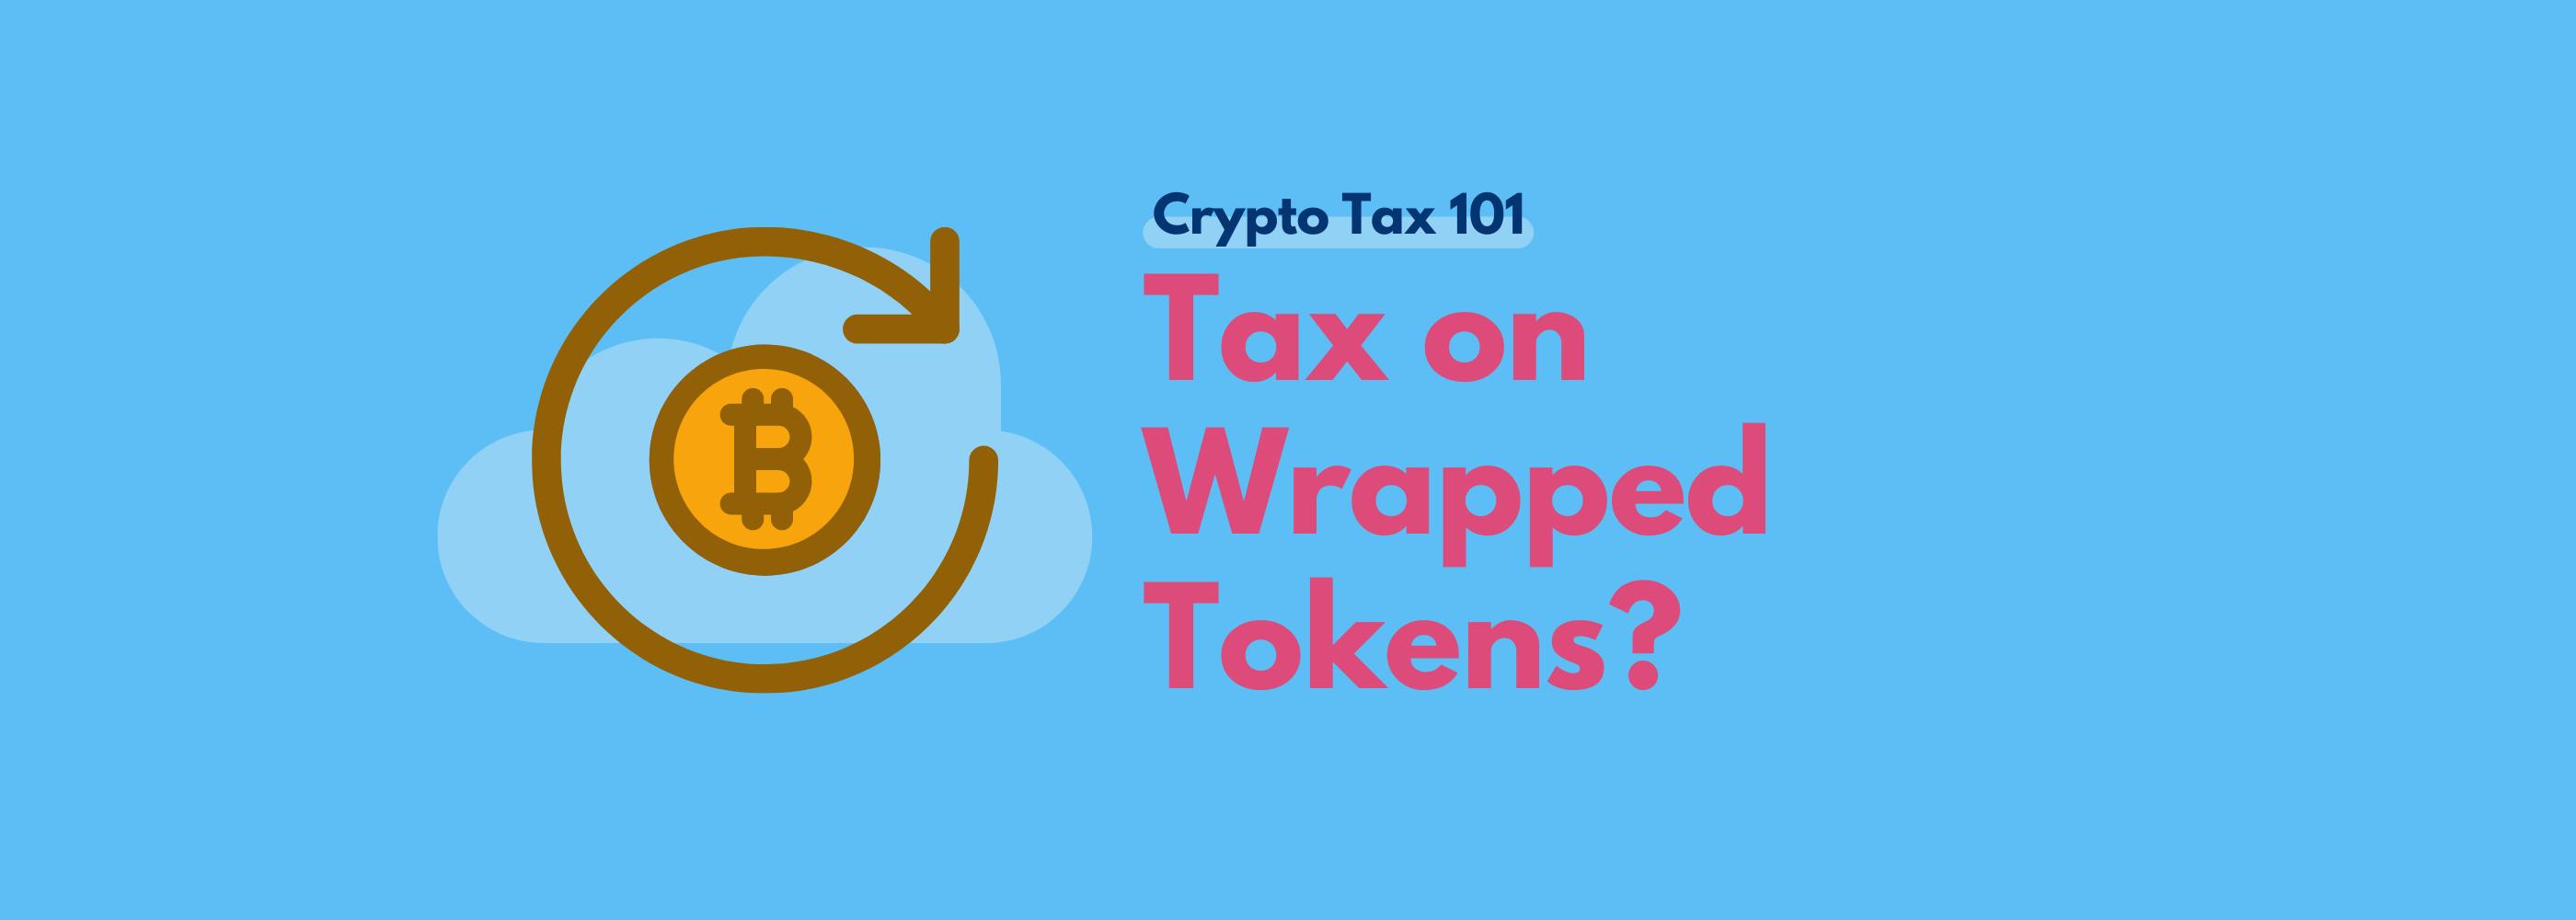 Koinly crypto tax calculator explains tax on wrapped tokens